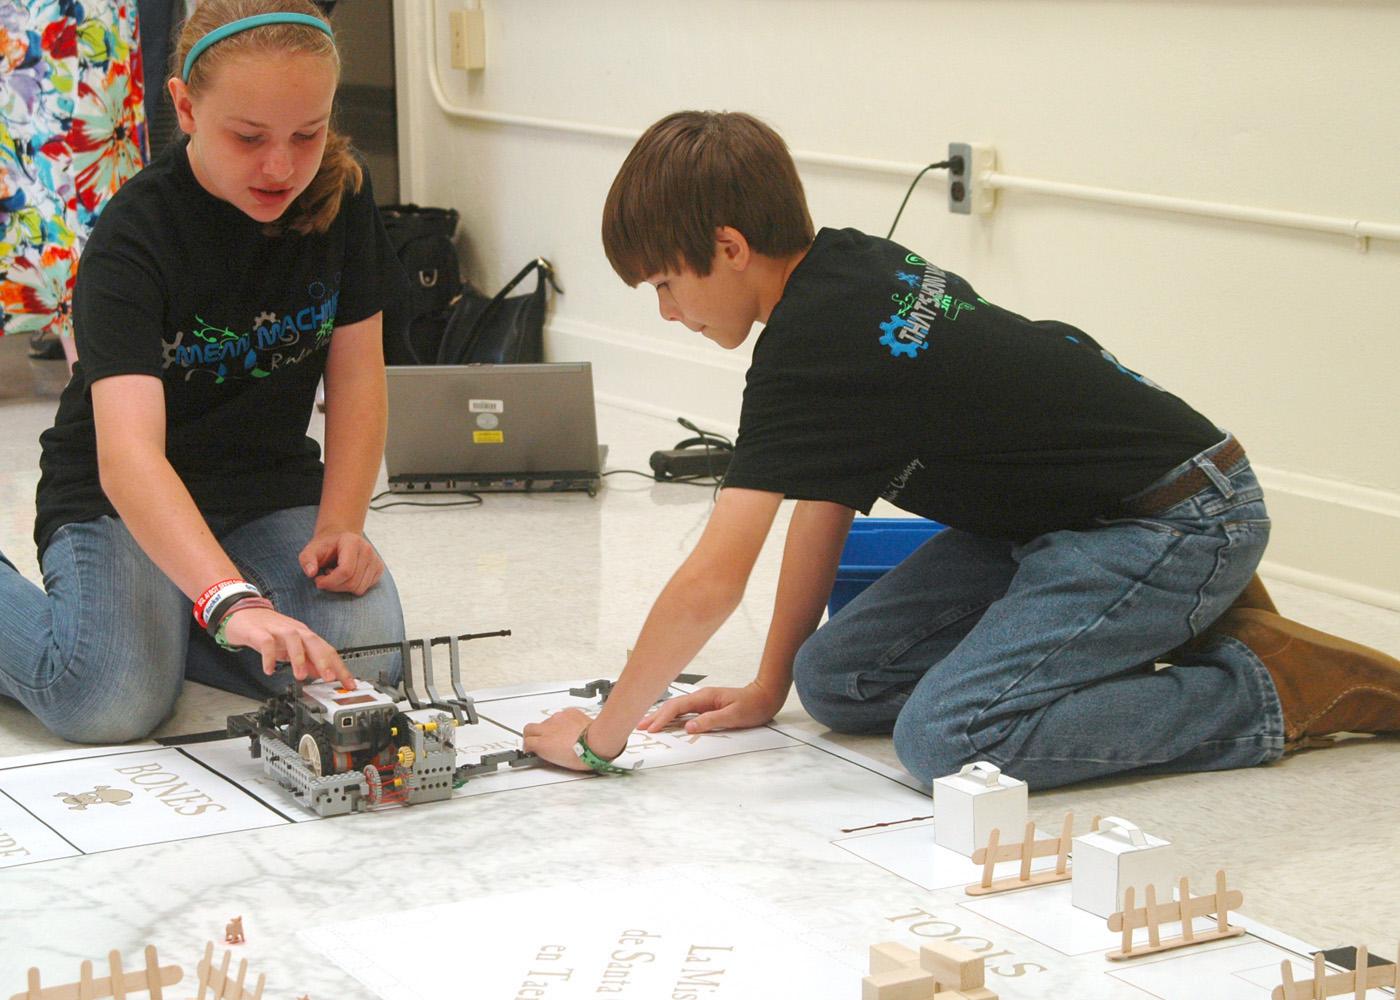 Lillian Stewart and Thaddeus Webb, members of The Mean Machines 4-H robotics team in Rankin County, practice with their robot before afternoon competition at the Southwest District 4-H Project Achievement Day held at Hinds Community College in Raymond, Mississippi. Junior 4-H members, ages 8 to 13, participated in contests on a variety of topics, including foods and nutrition, engineering, and meat and dairy judging on June 6, 7, 12 and 13. (Photo by MSU Ag Communications/Susan Collins-Smith)